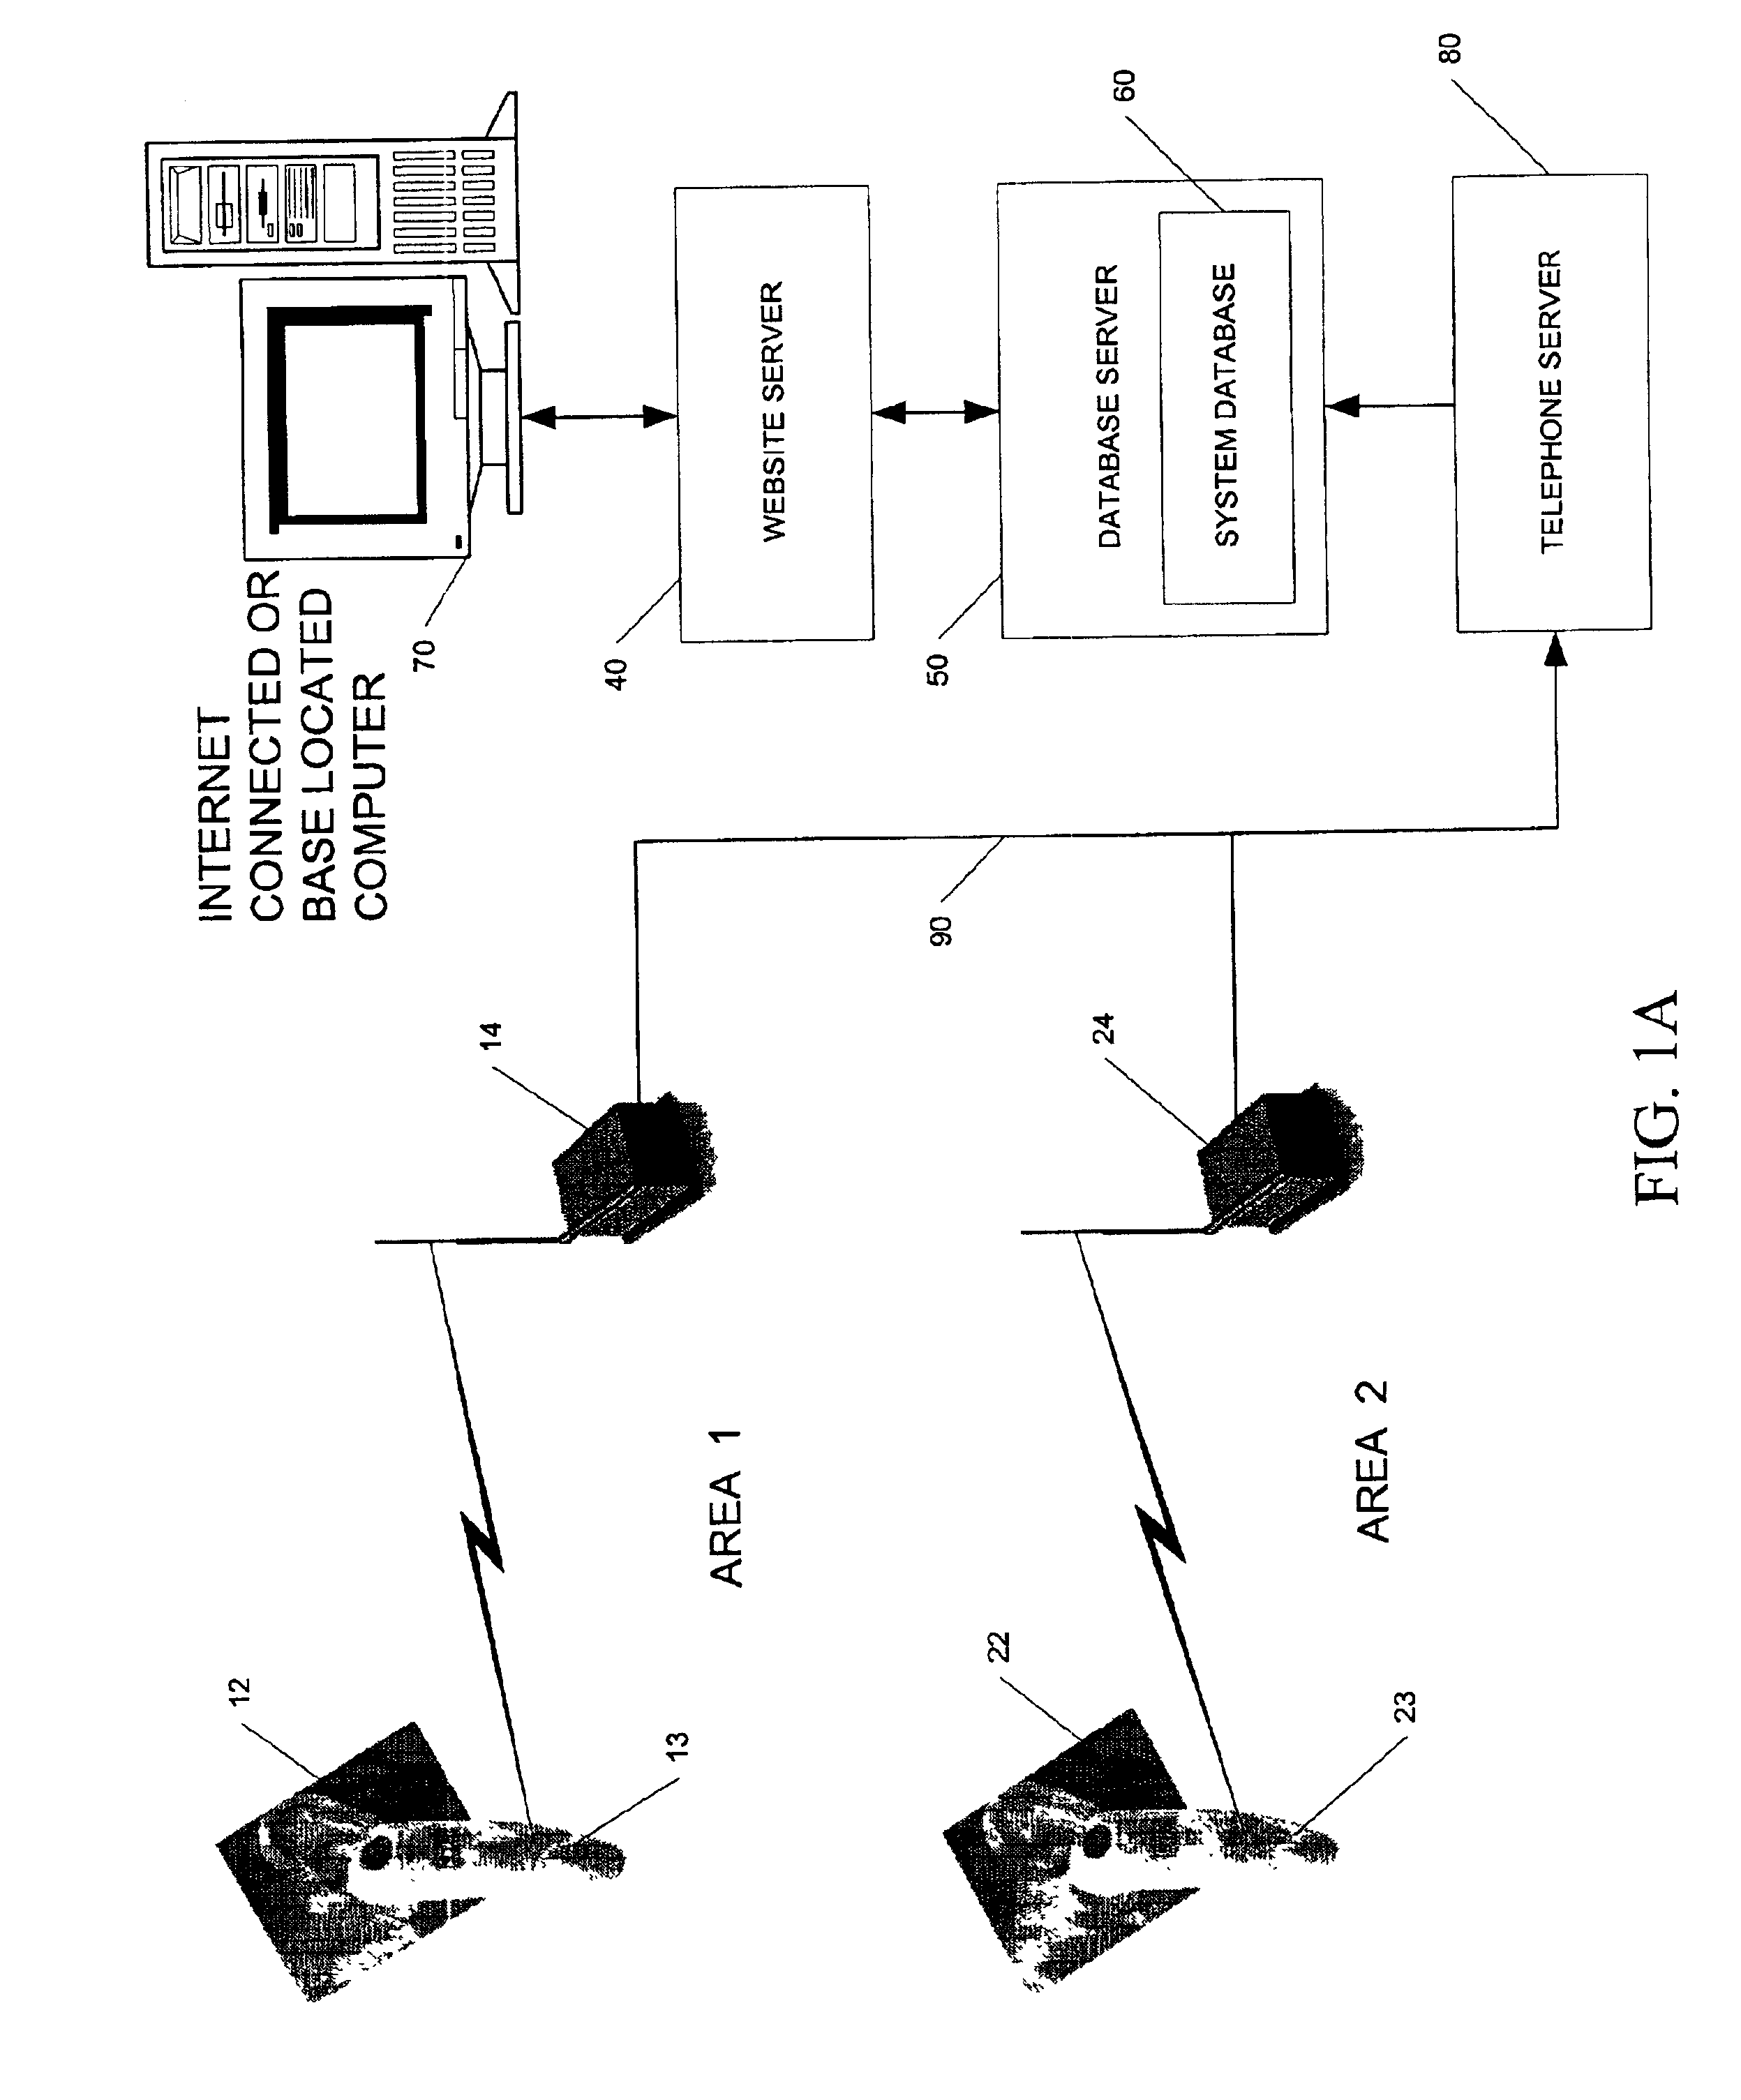 Early warning system and methods for detection of a bioterrorism event